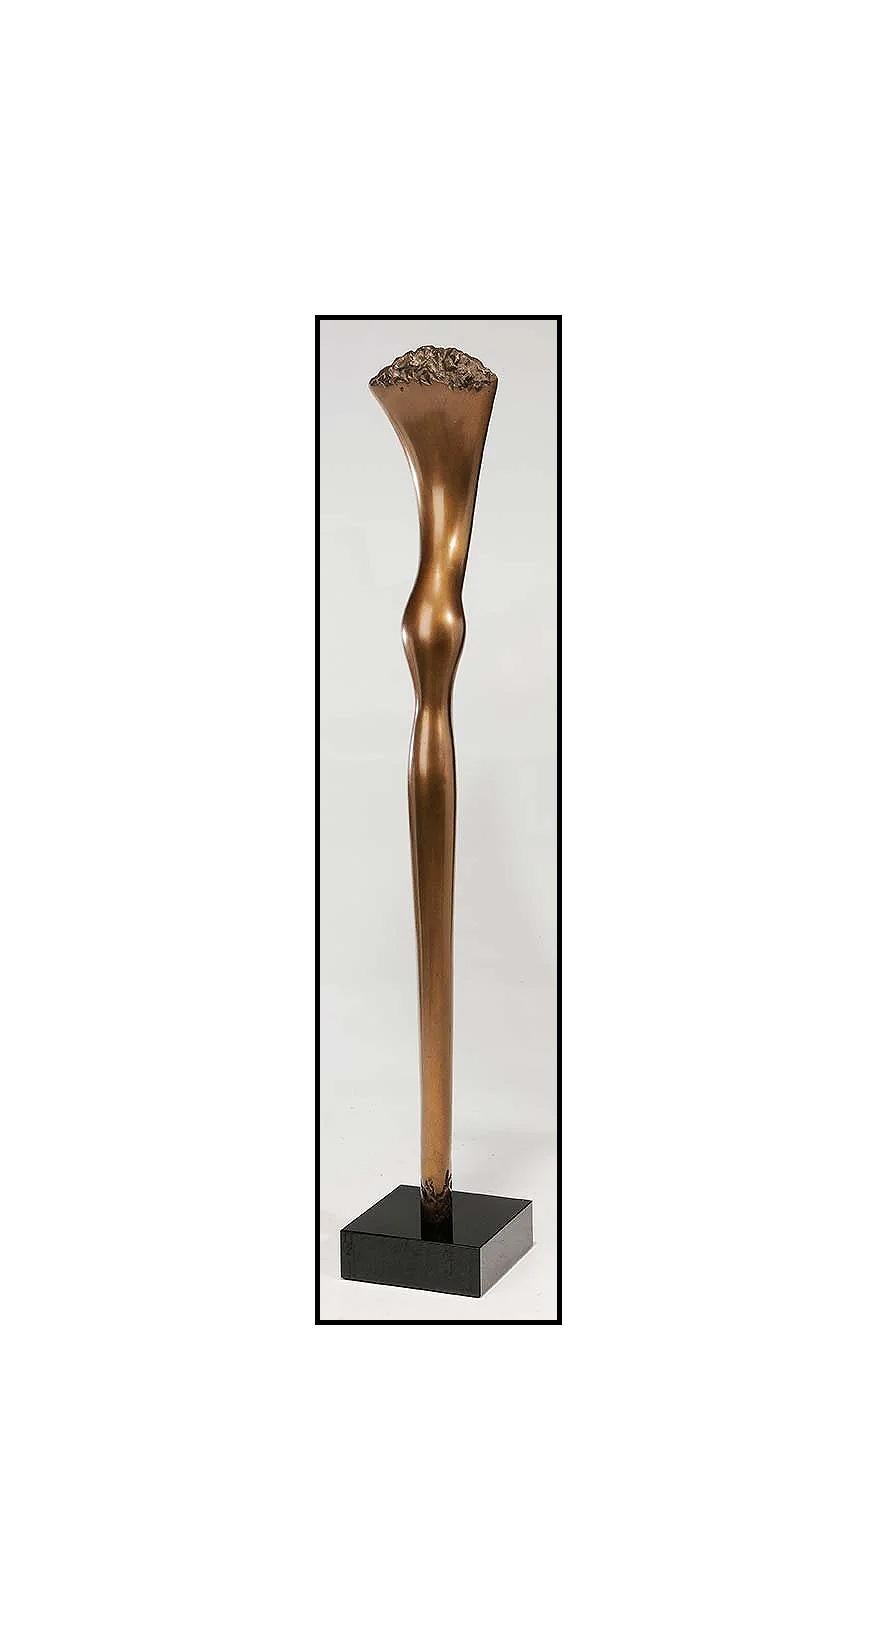 Jack Zajac Original & Authentic Full Round Bronze Sculpture "Falling Water V", Listed with the Submit Best Offer option 

Accepting OFFERS Now: Up for sale is this very RARE, spectacular, and Authentic Jack Zajac, Full Round sculpture titled